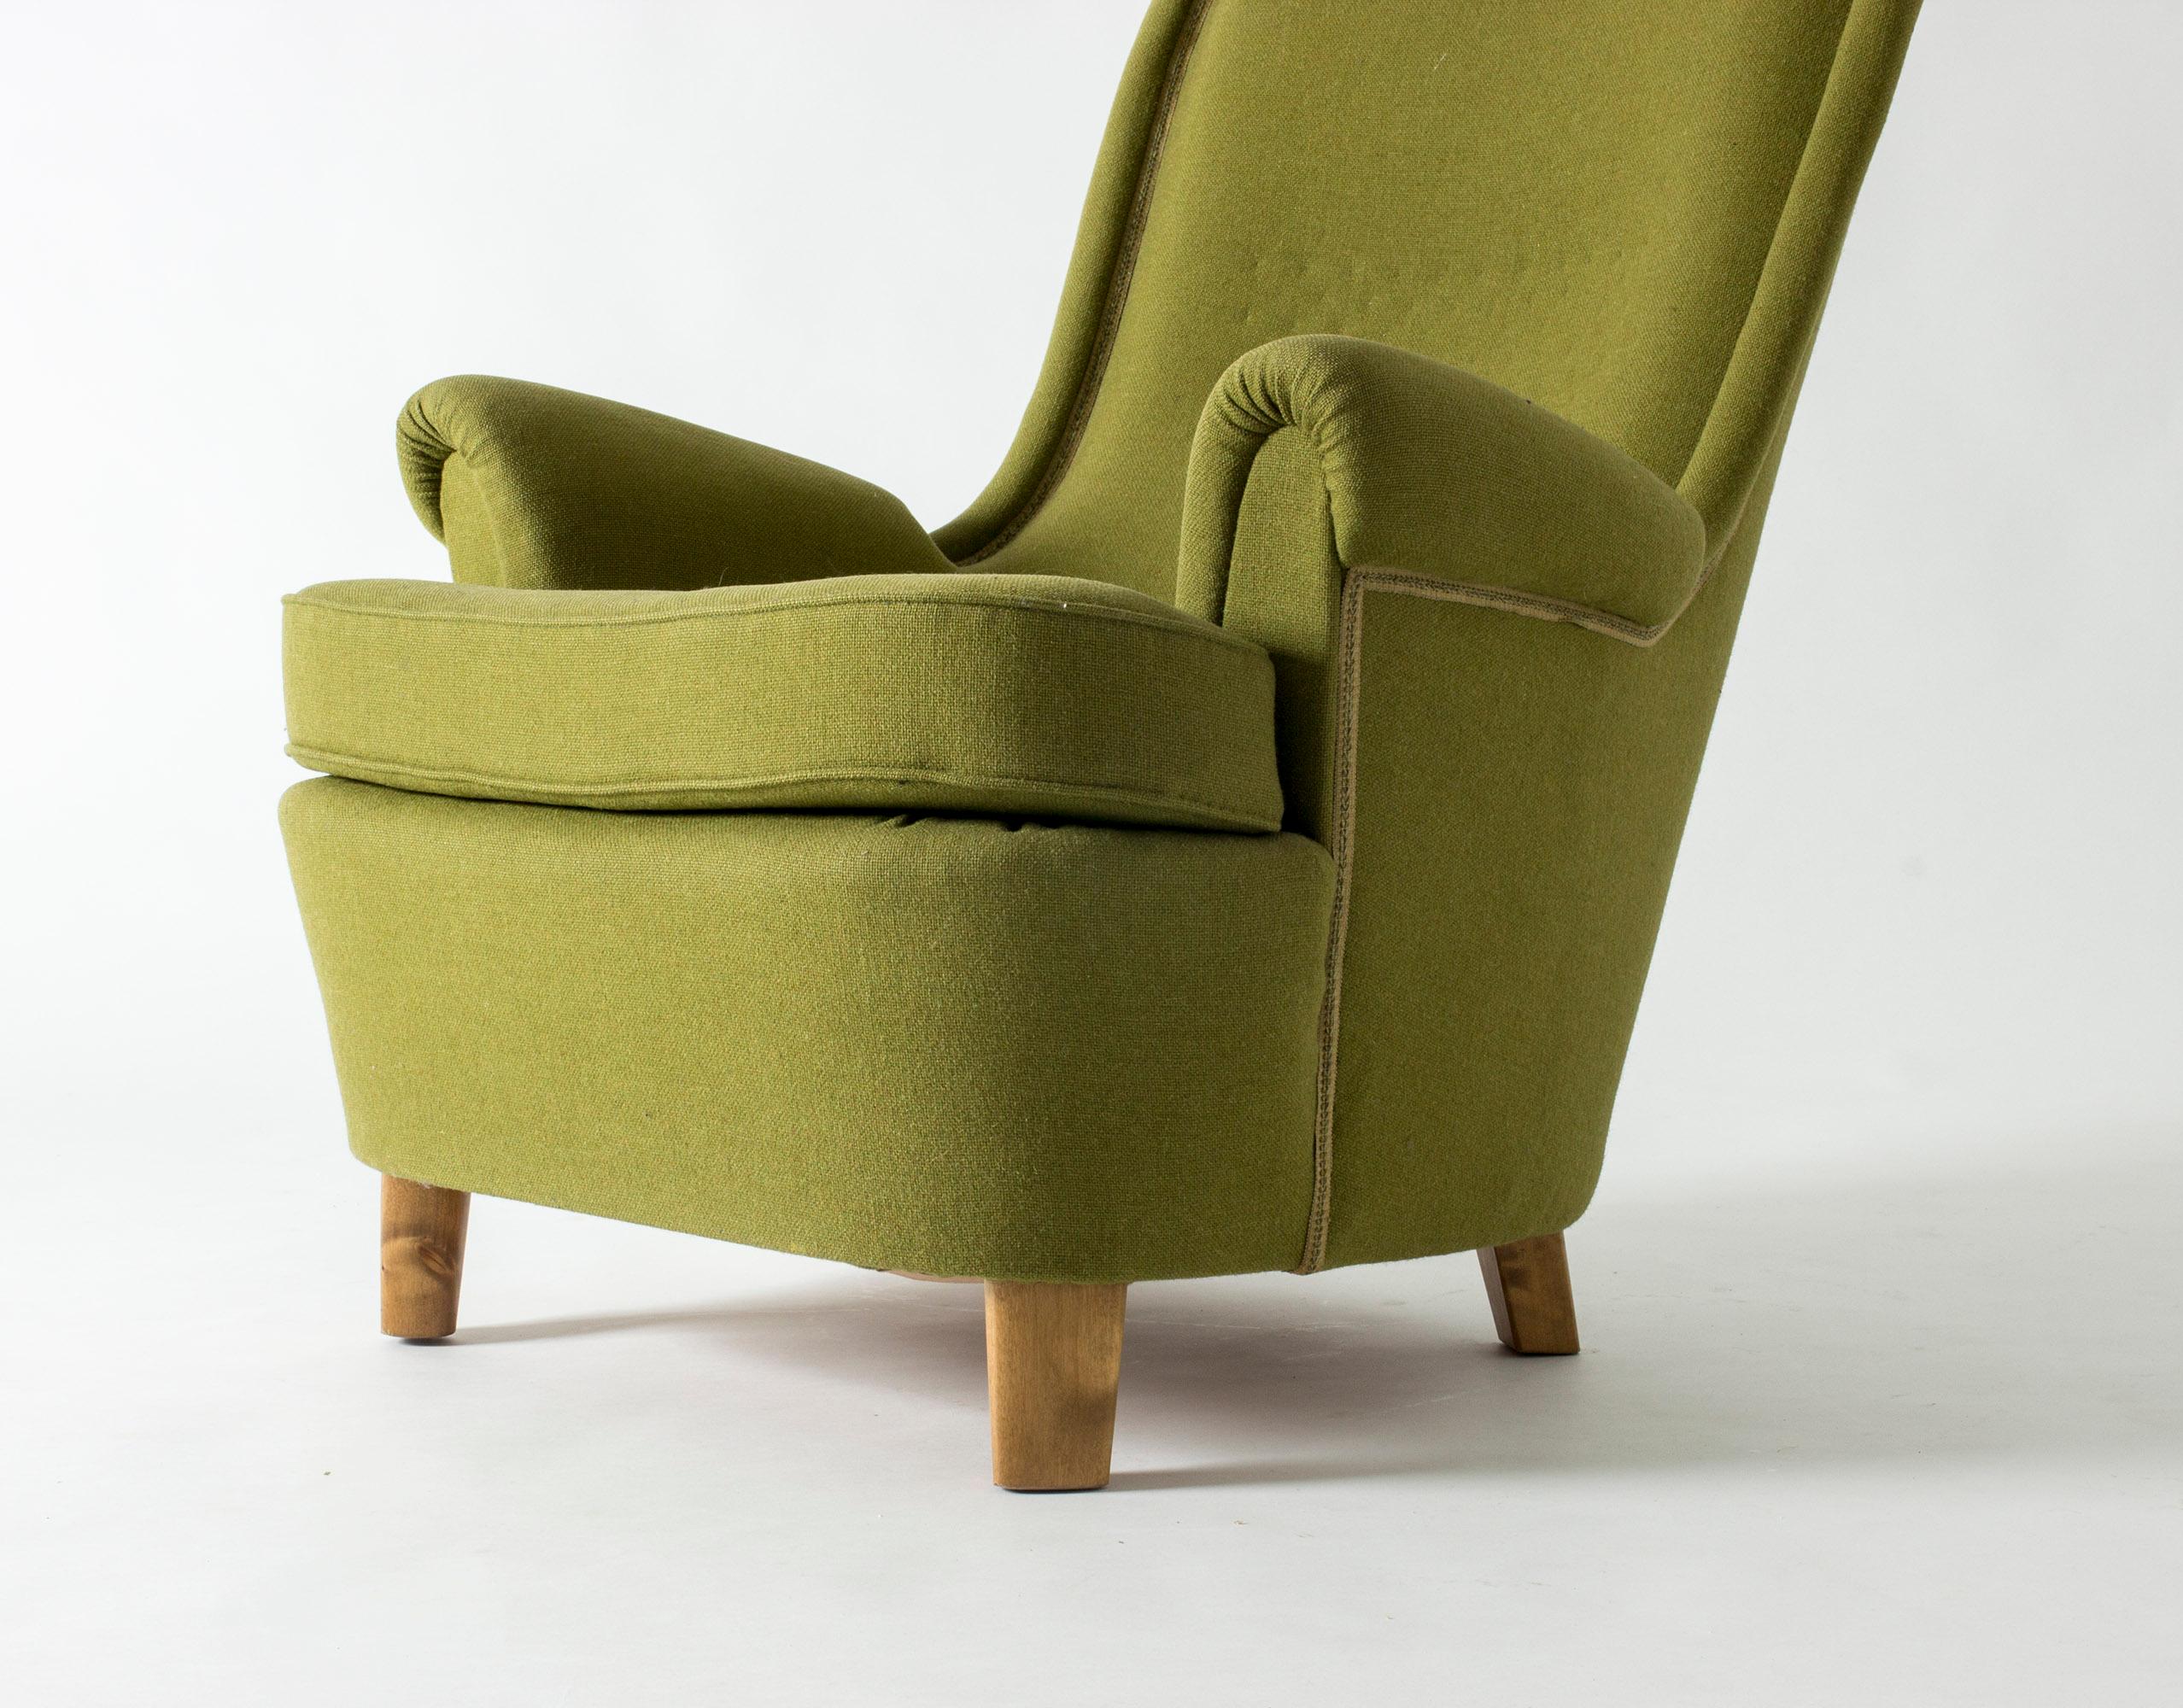 Upholstery 1930s Lounge Chairs by Carl-Axel Acking